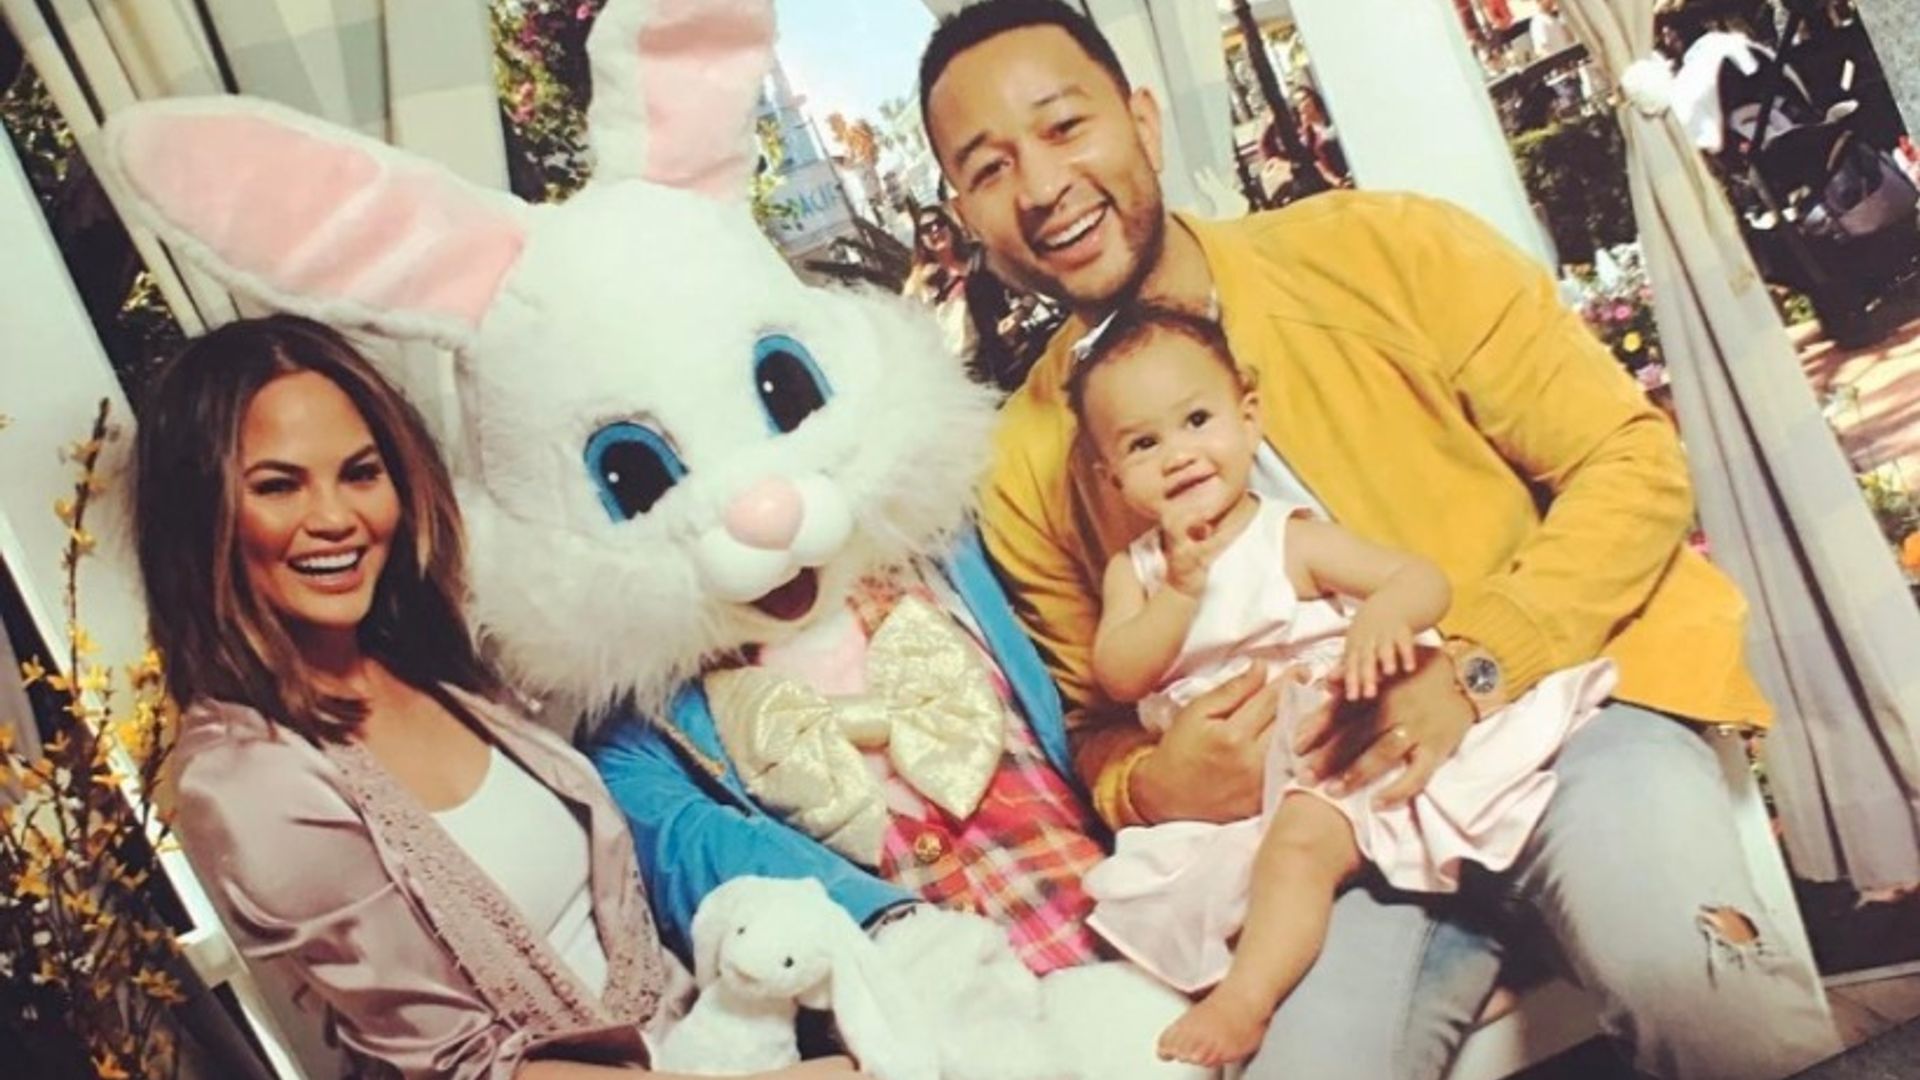 Mariah Carey Celebrates Easter with Her Kids and a Real Bunny Rabbit